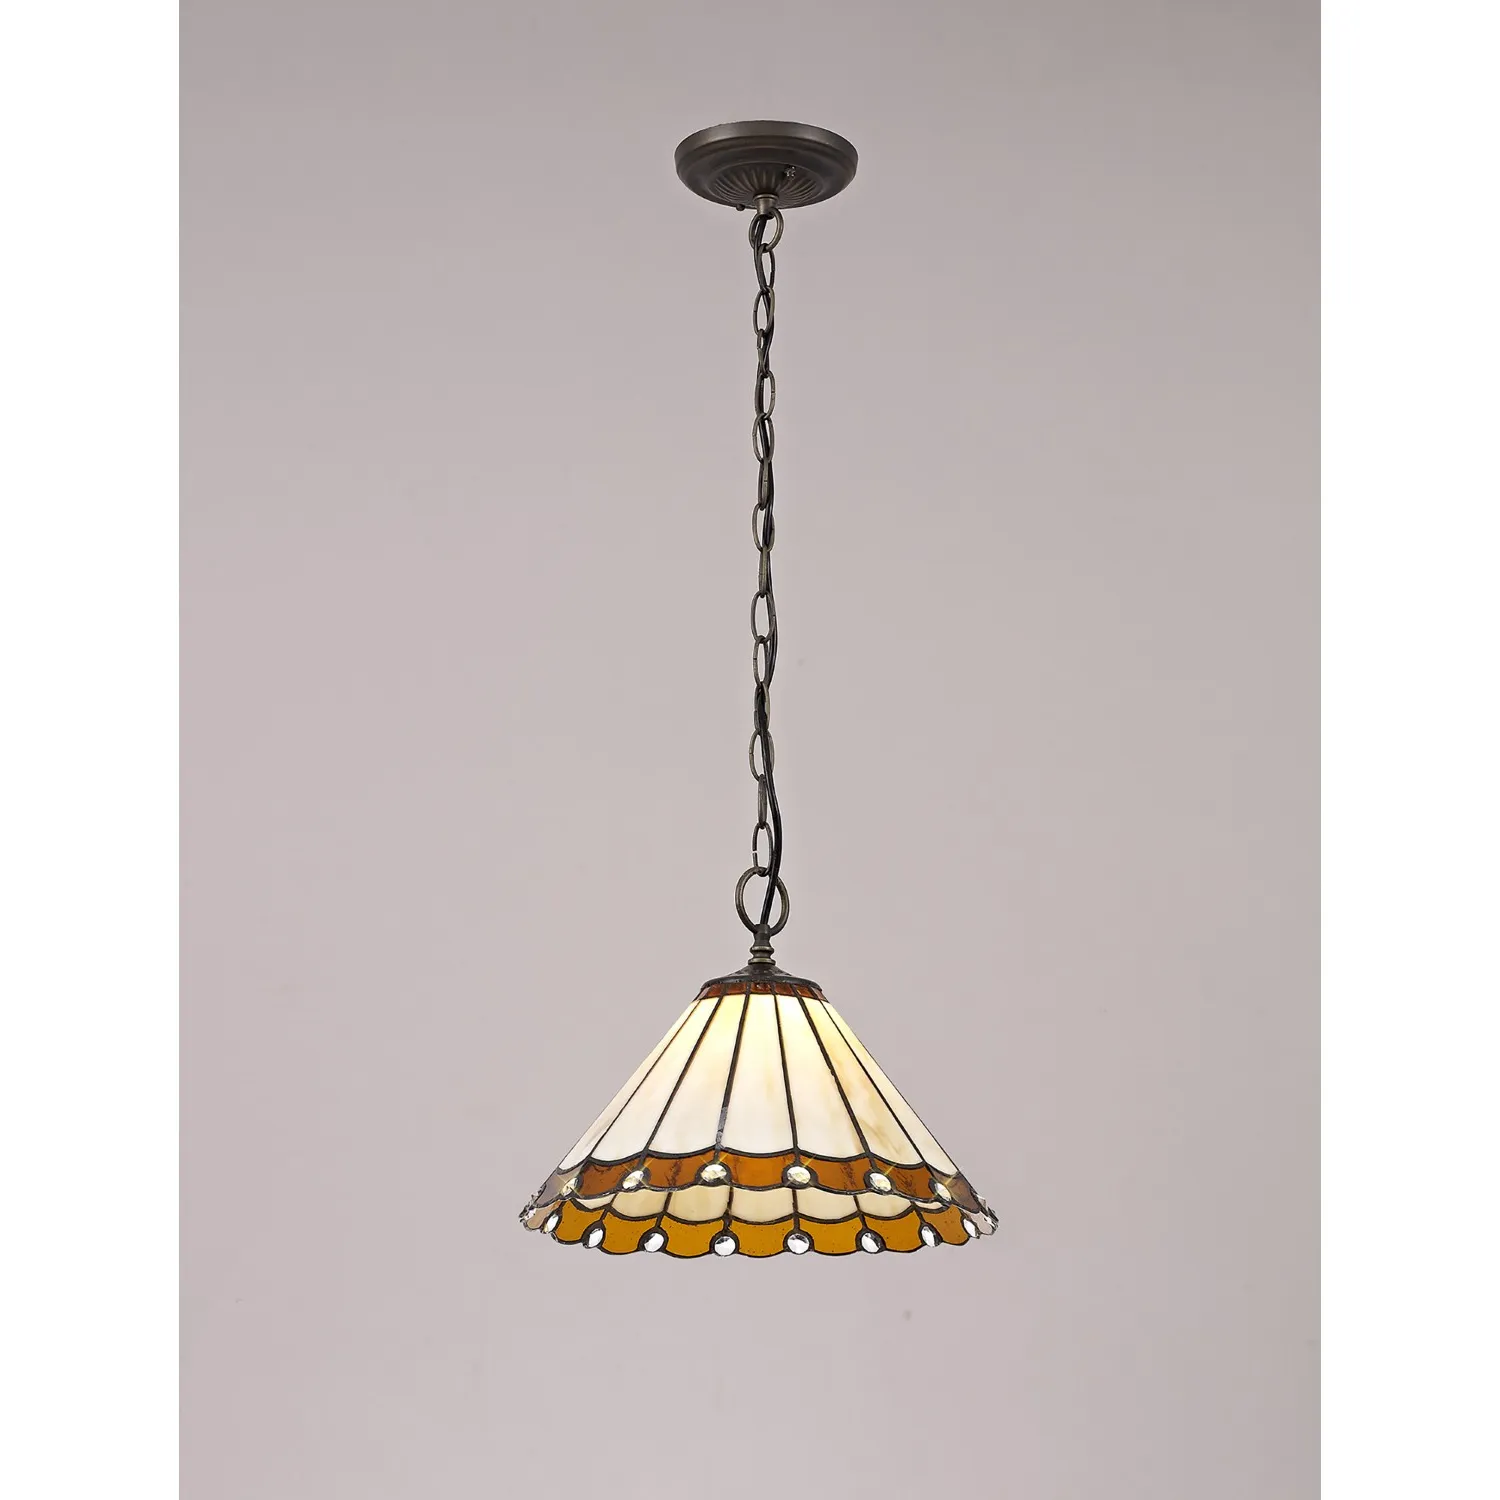 Ware 1 Light Downlighter Pendant E27 With 30cm Tiffany Shade, Amber Cream Crystal Aged Antique Brass